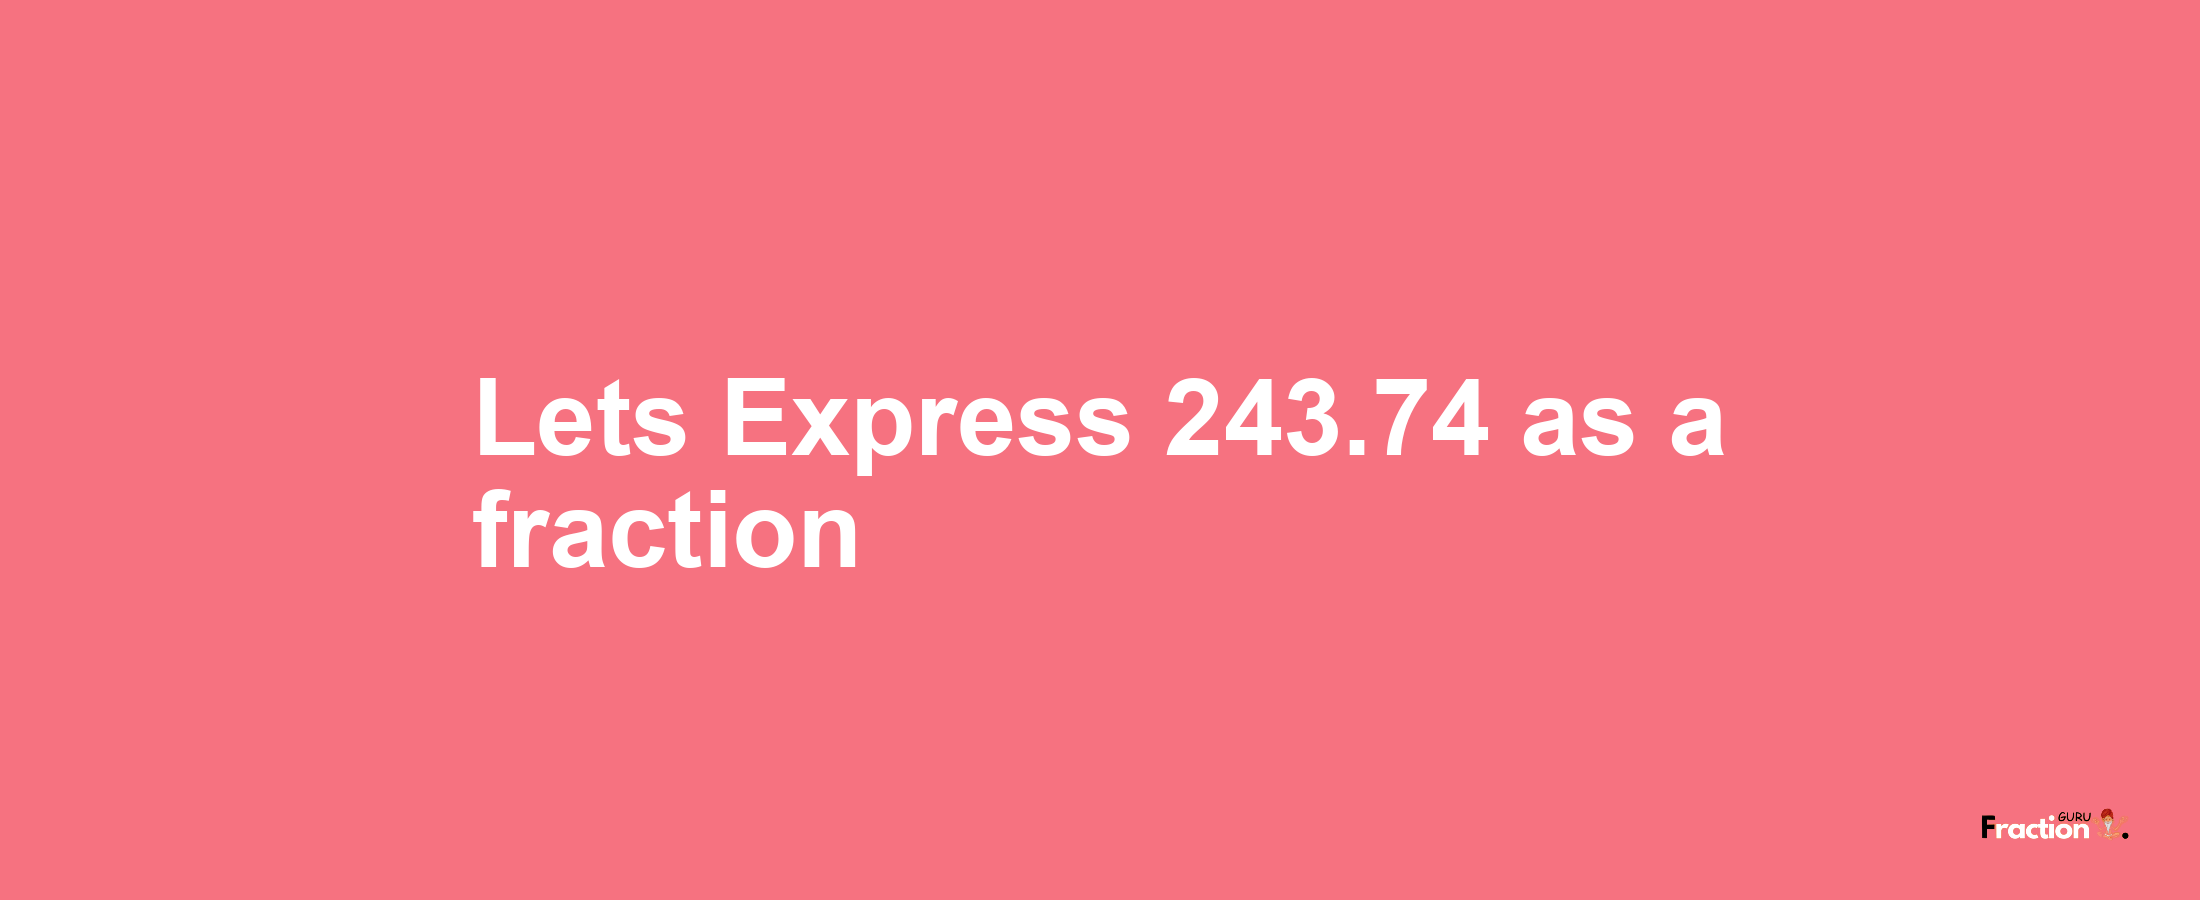 Lets Express 243.74 as afraction